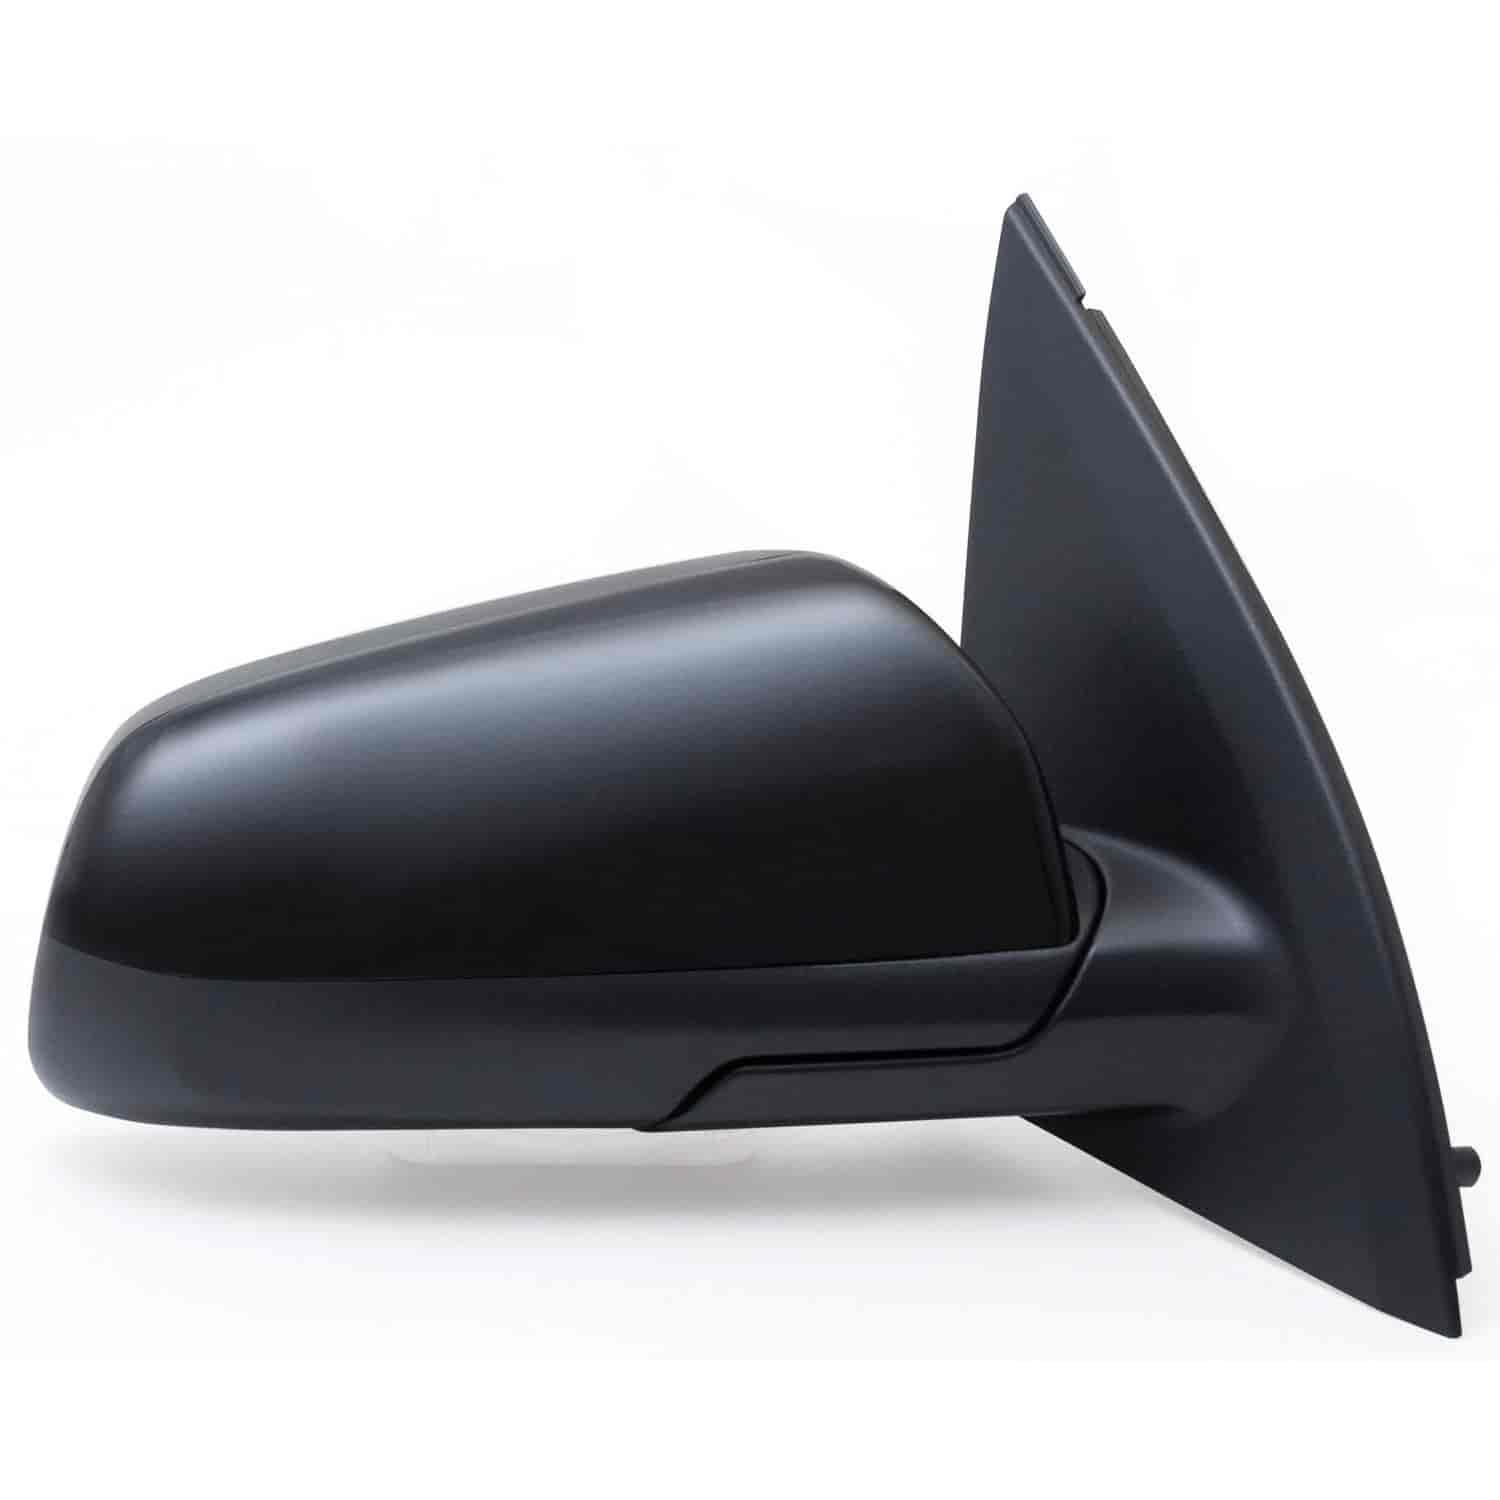 OEM Style Replacement mirror for 08-09 Pontiac G8 passenger side mirror tested to fit and function l